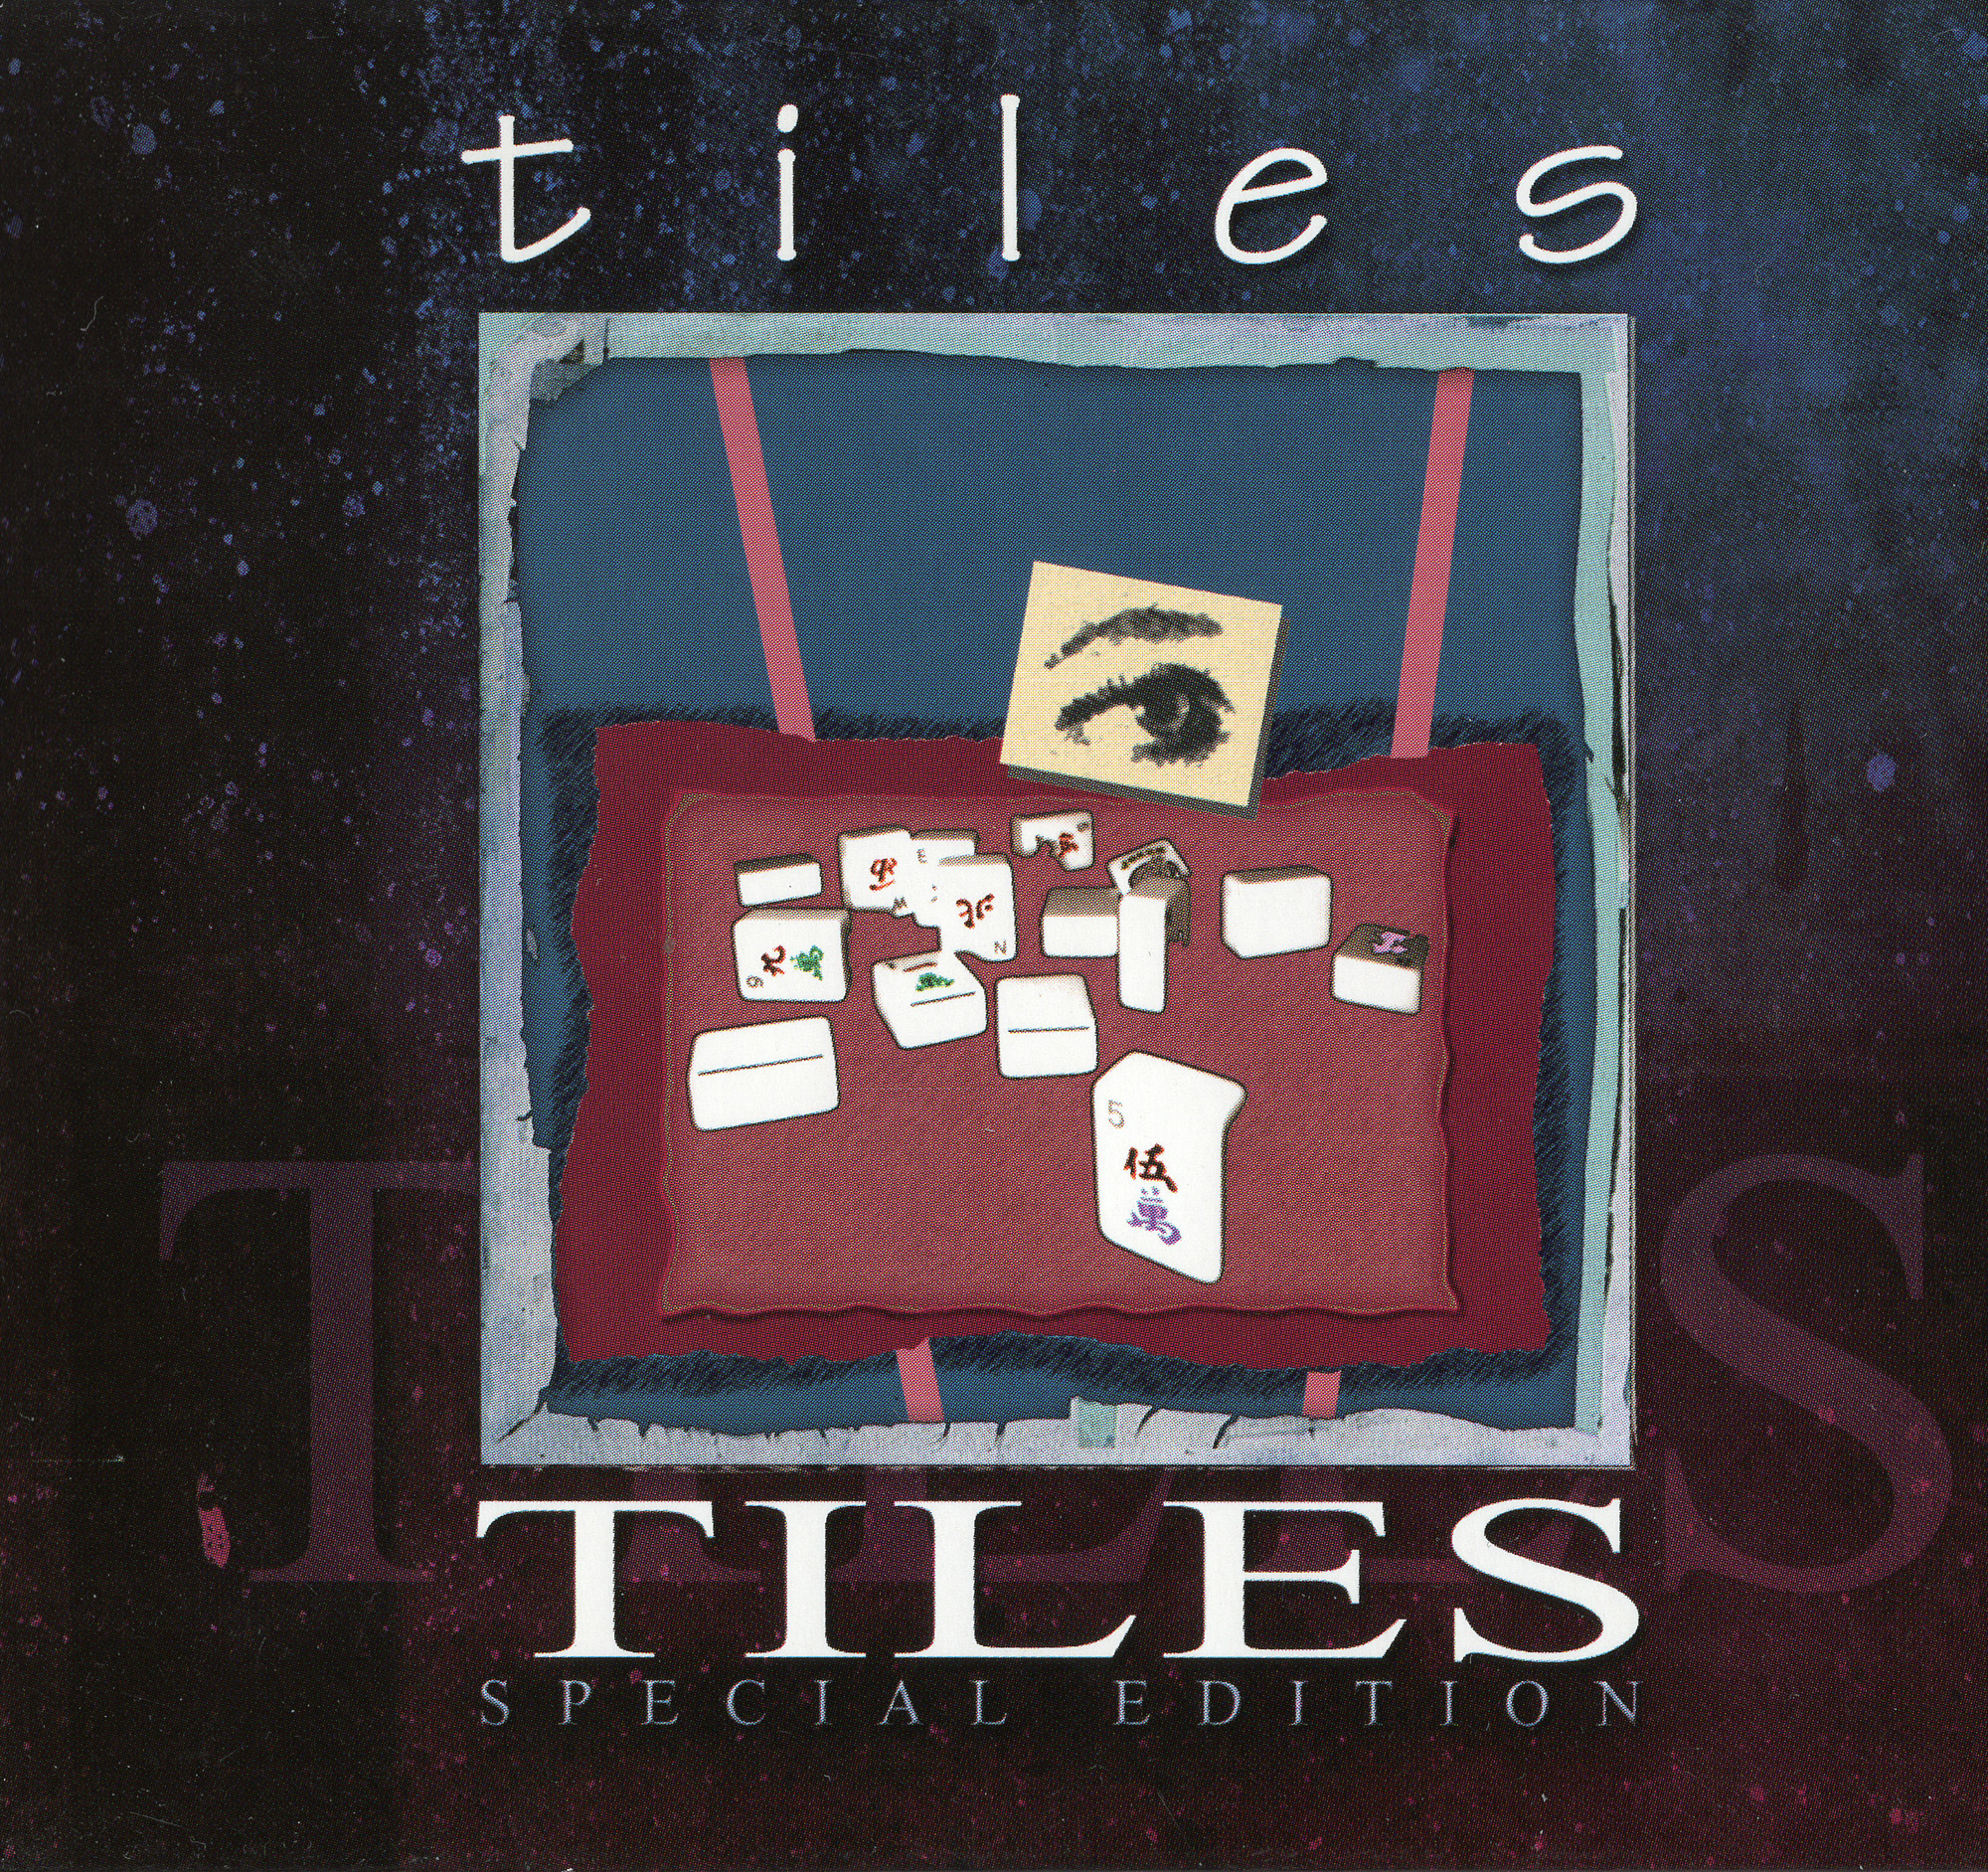 Tiles Special Edition (2004)